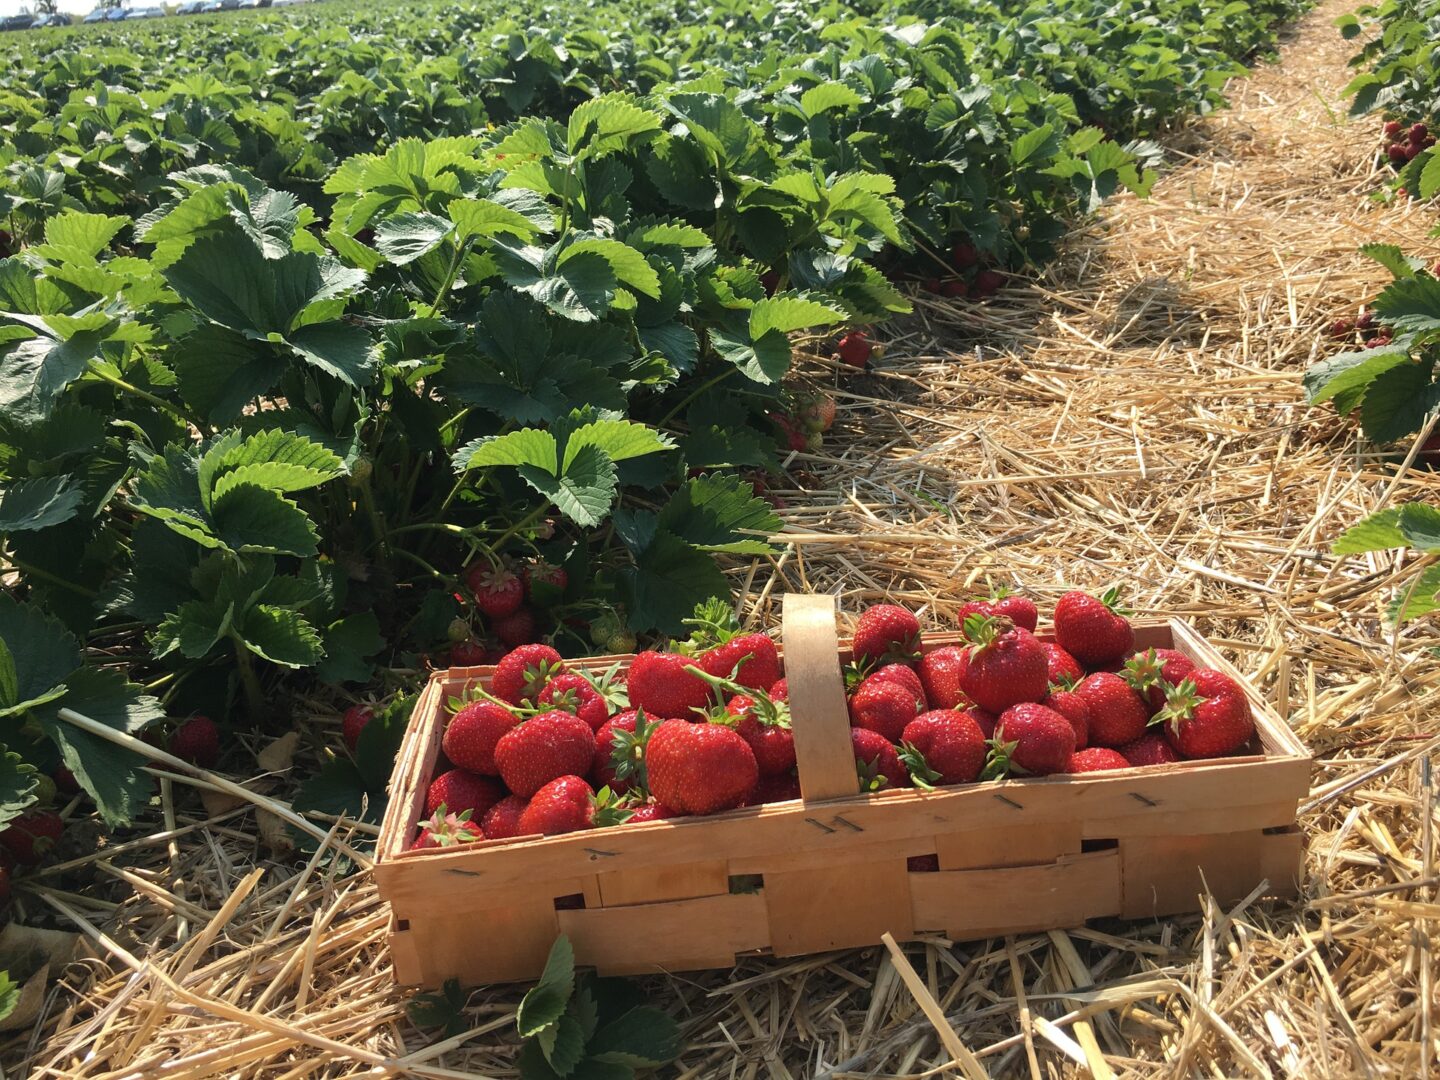 A basket of strawberries in the middle of a strawberry patch